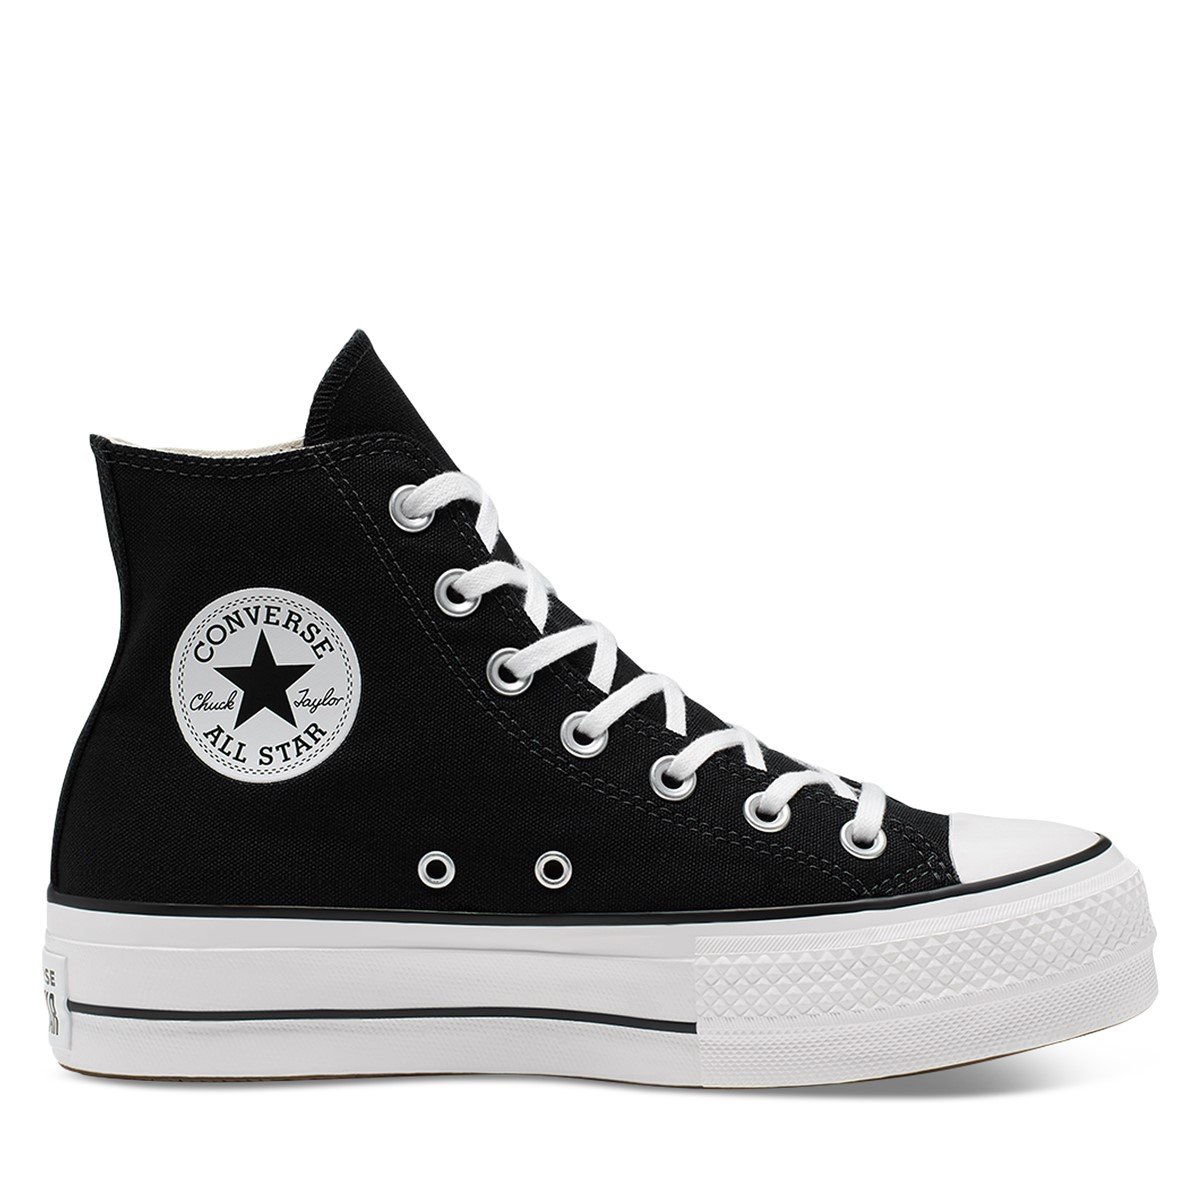 Baskets Chuck Taylor All-Star Lift noires et blanches